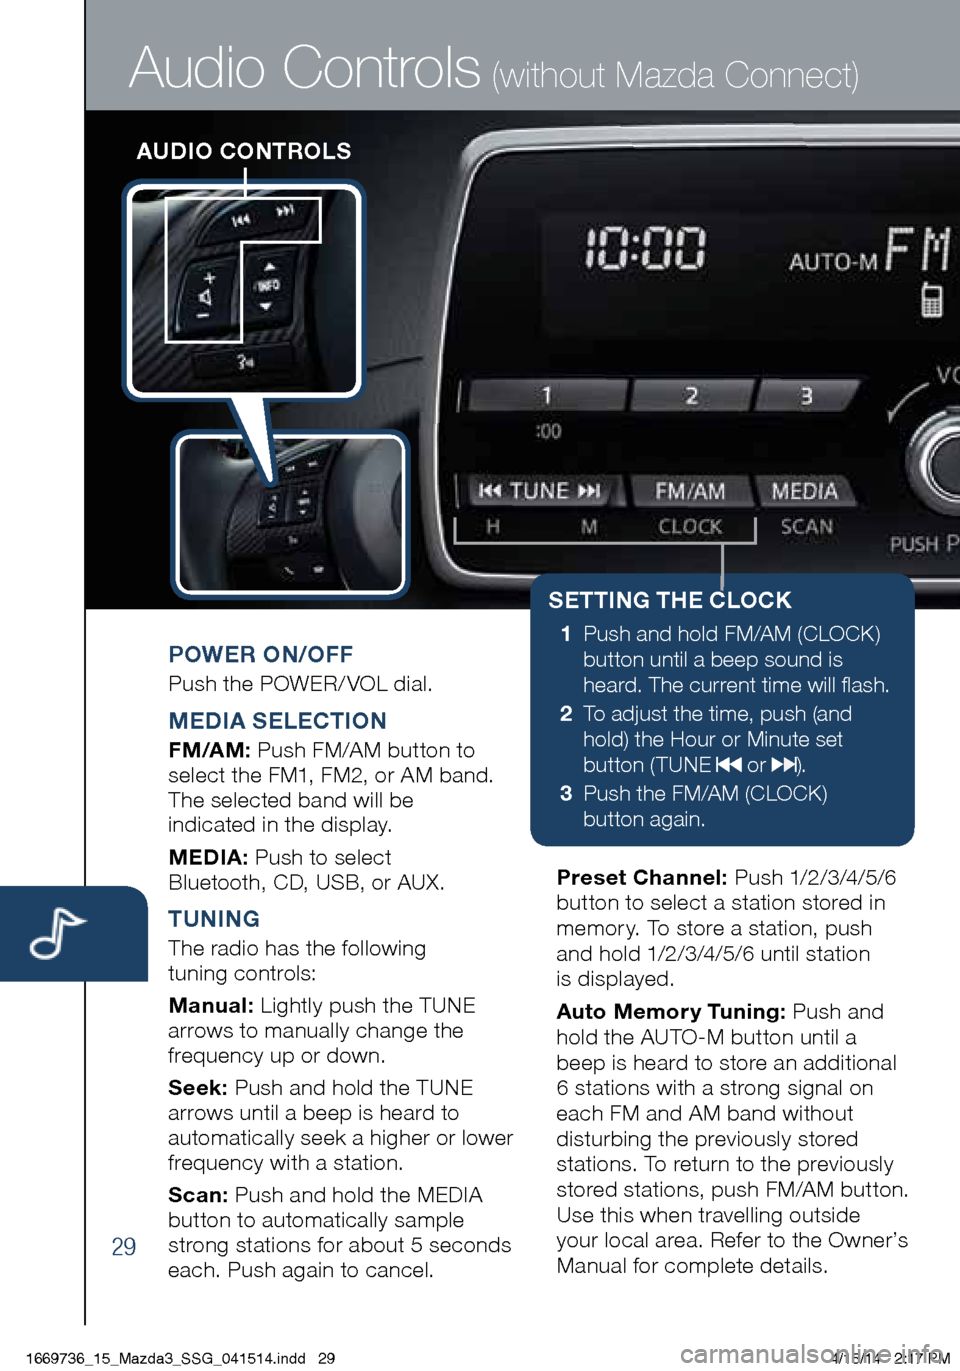 MAZDA MODEL 3 HATCHBACK 2014  Smart Start Guide (in English) 29
AUDIO CONTROLS
Audio Controls (without Mazda Connect)
POWER ON/OFF
Push the POWER/ VOL dial.
MEDIA SELECTION
FM/AM: Push FM/AM button to 
select the FM1, FM2, or AM band. 
The selected band will be